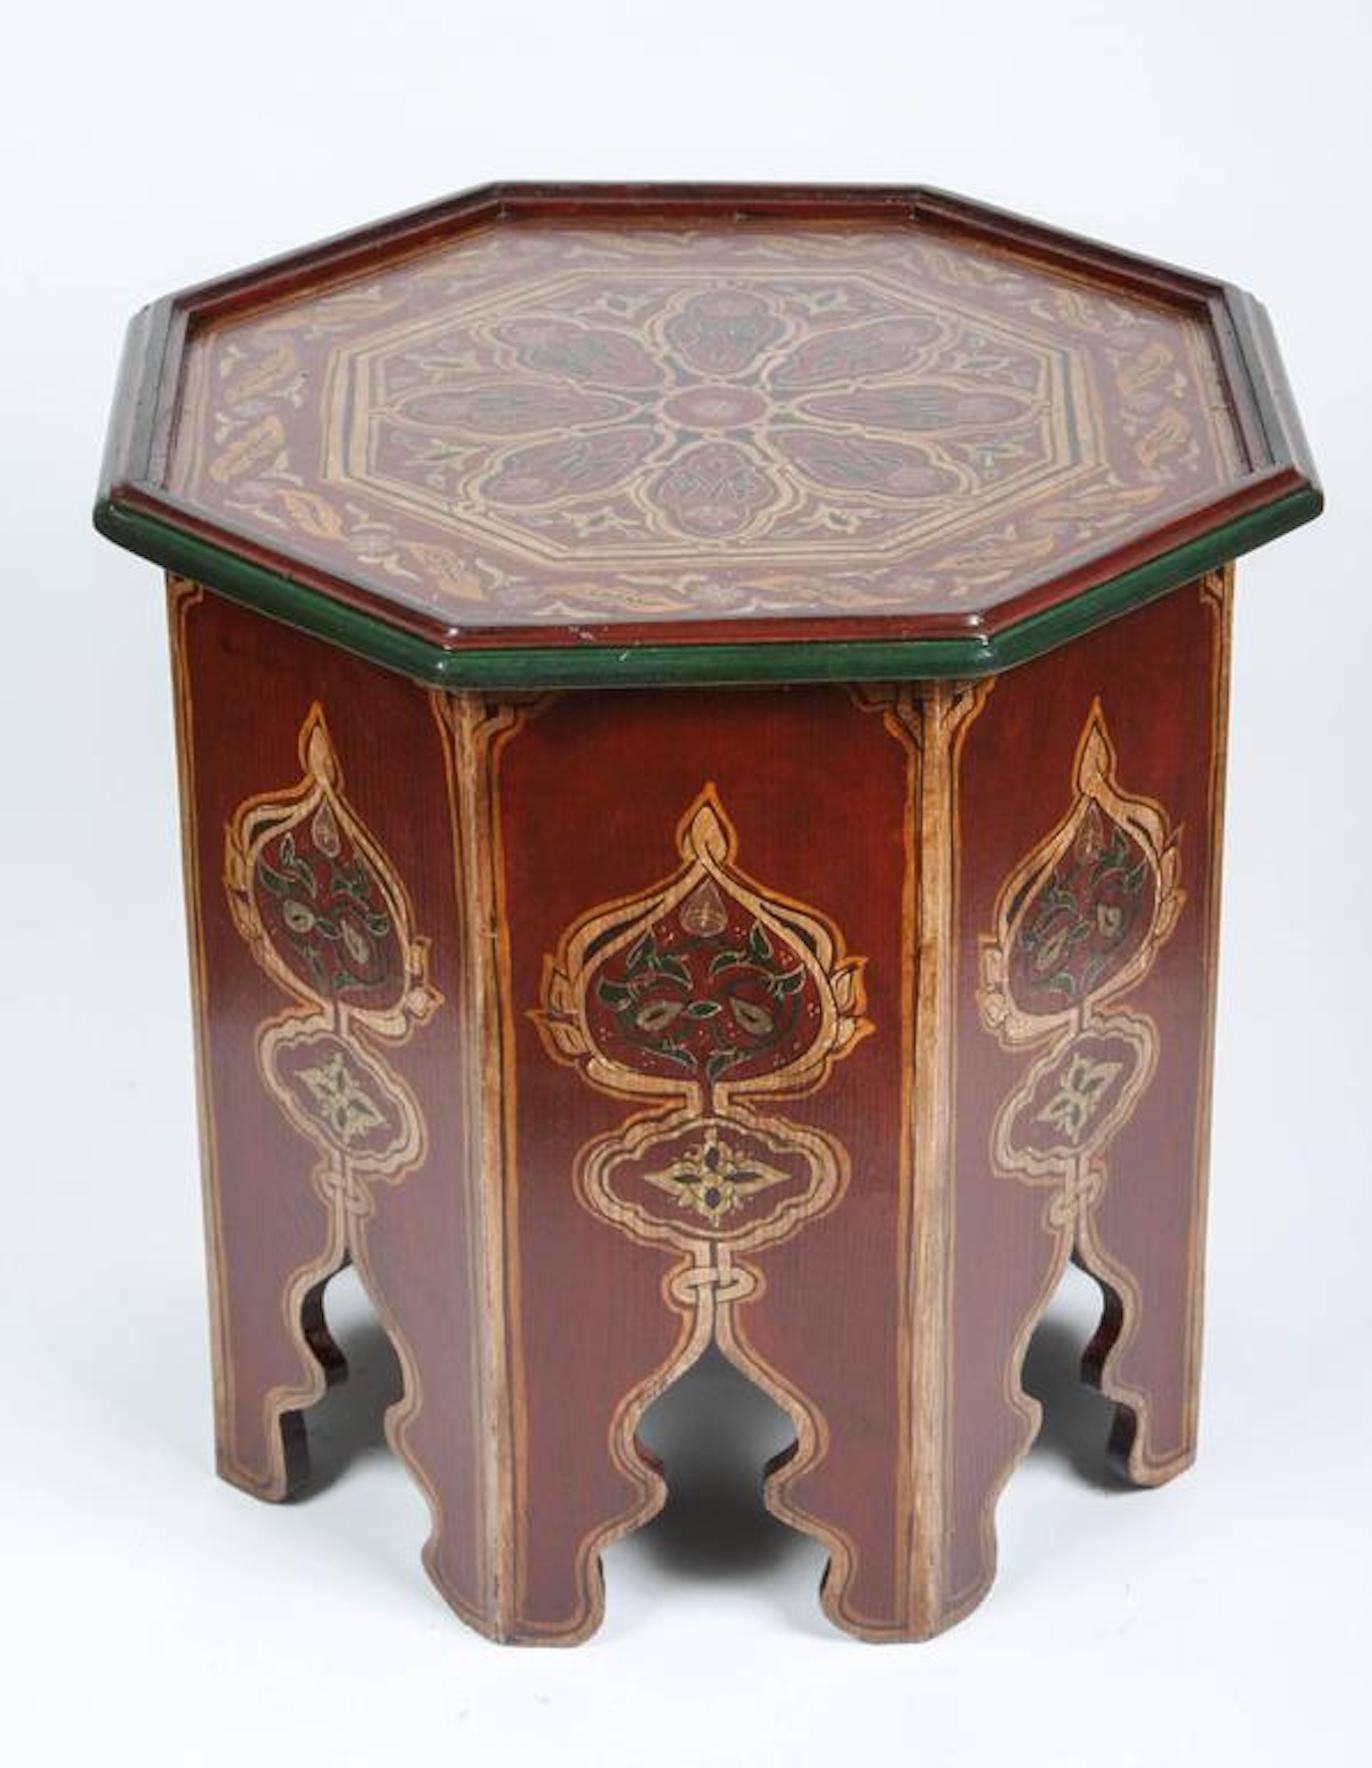 Moroccan hand-painted side table with Moorish designs.
 Maroon background with multicolored floral and geometric designs. 
Very fine Moorish artwork on an octagonal shape base with hand cut Moorish arches on each side. 
You can use them as